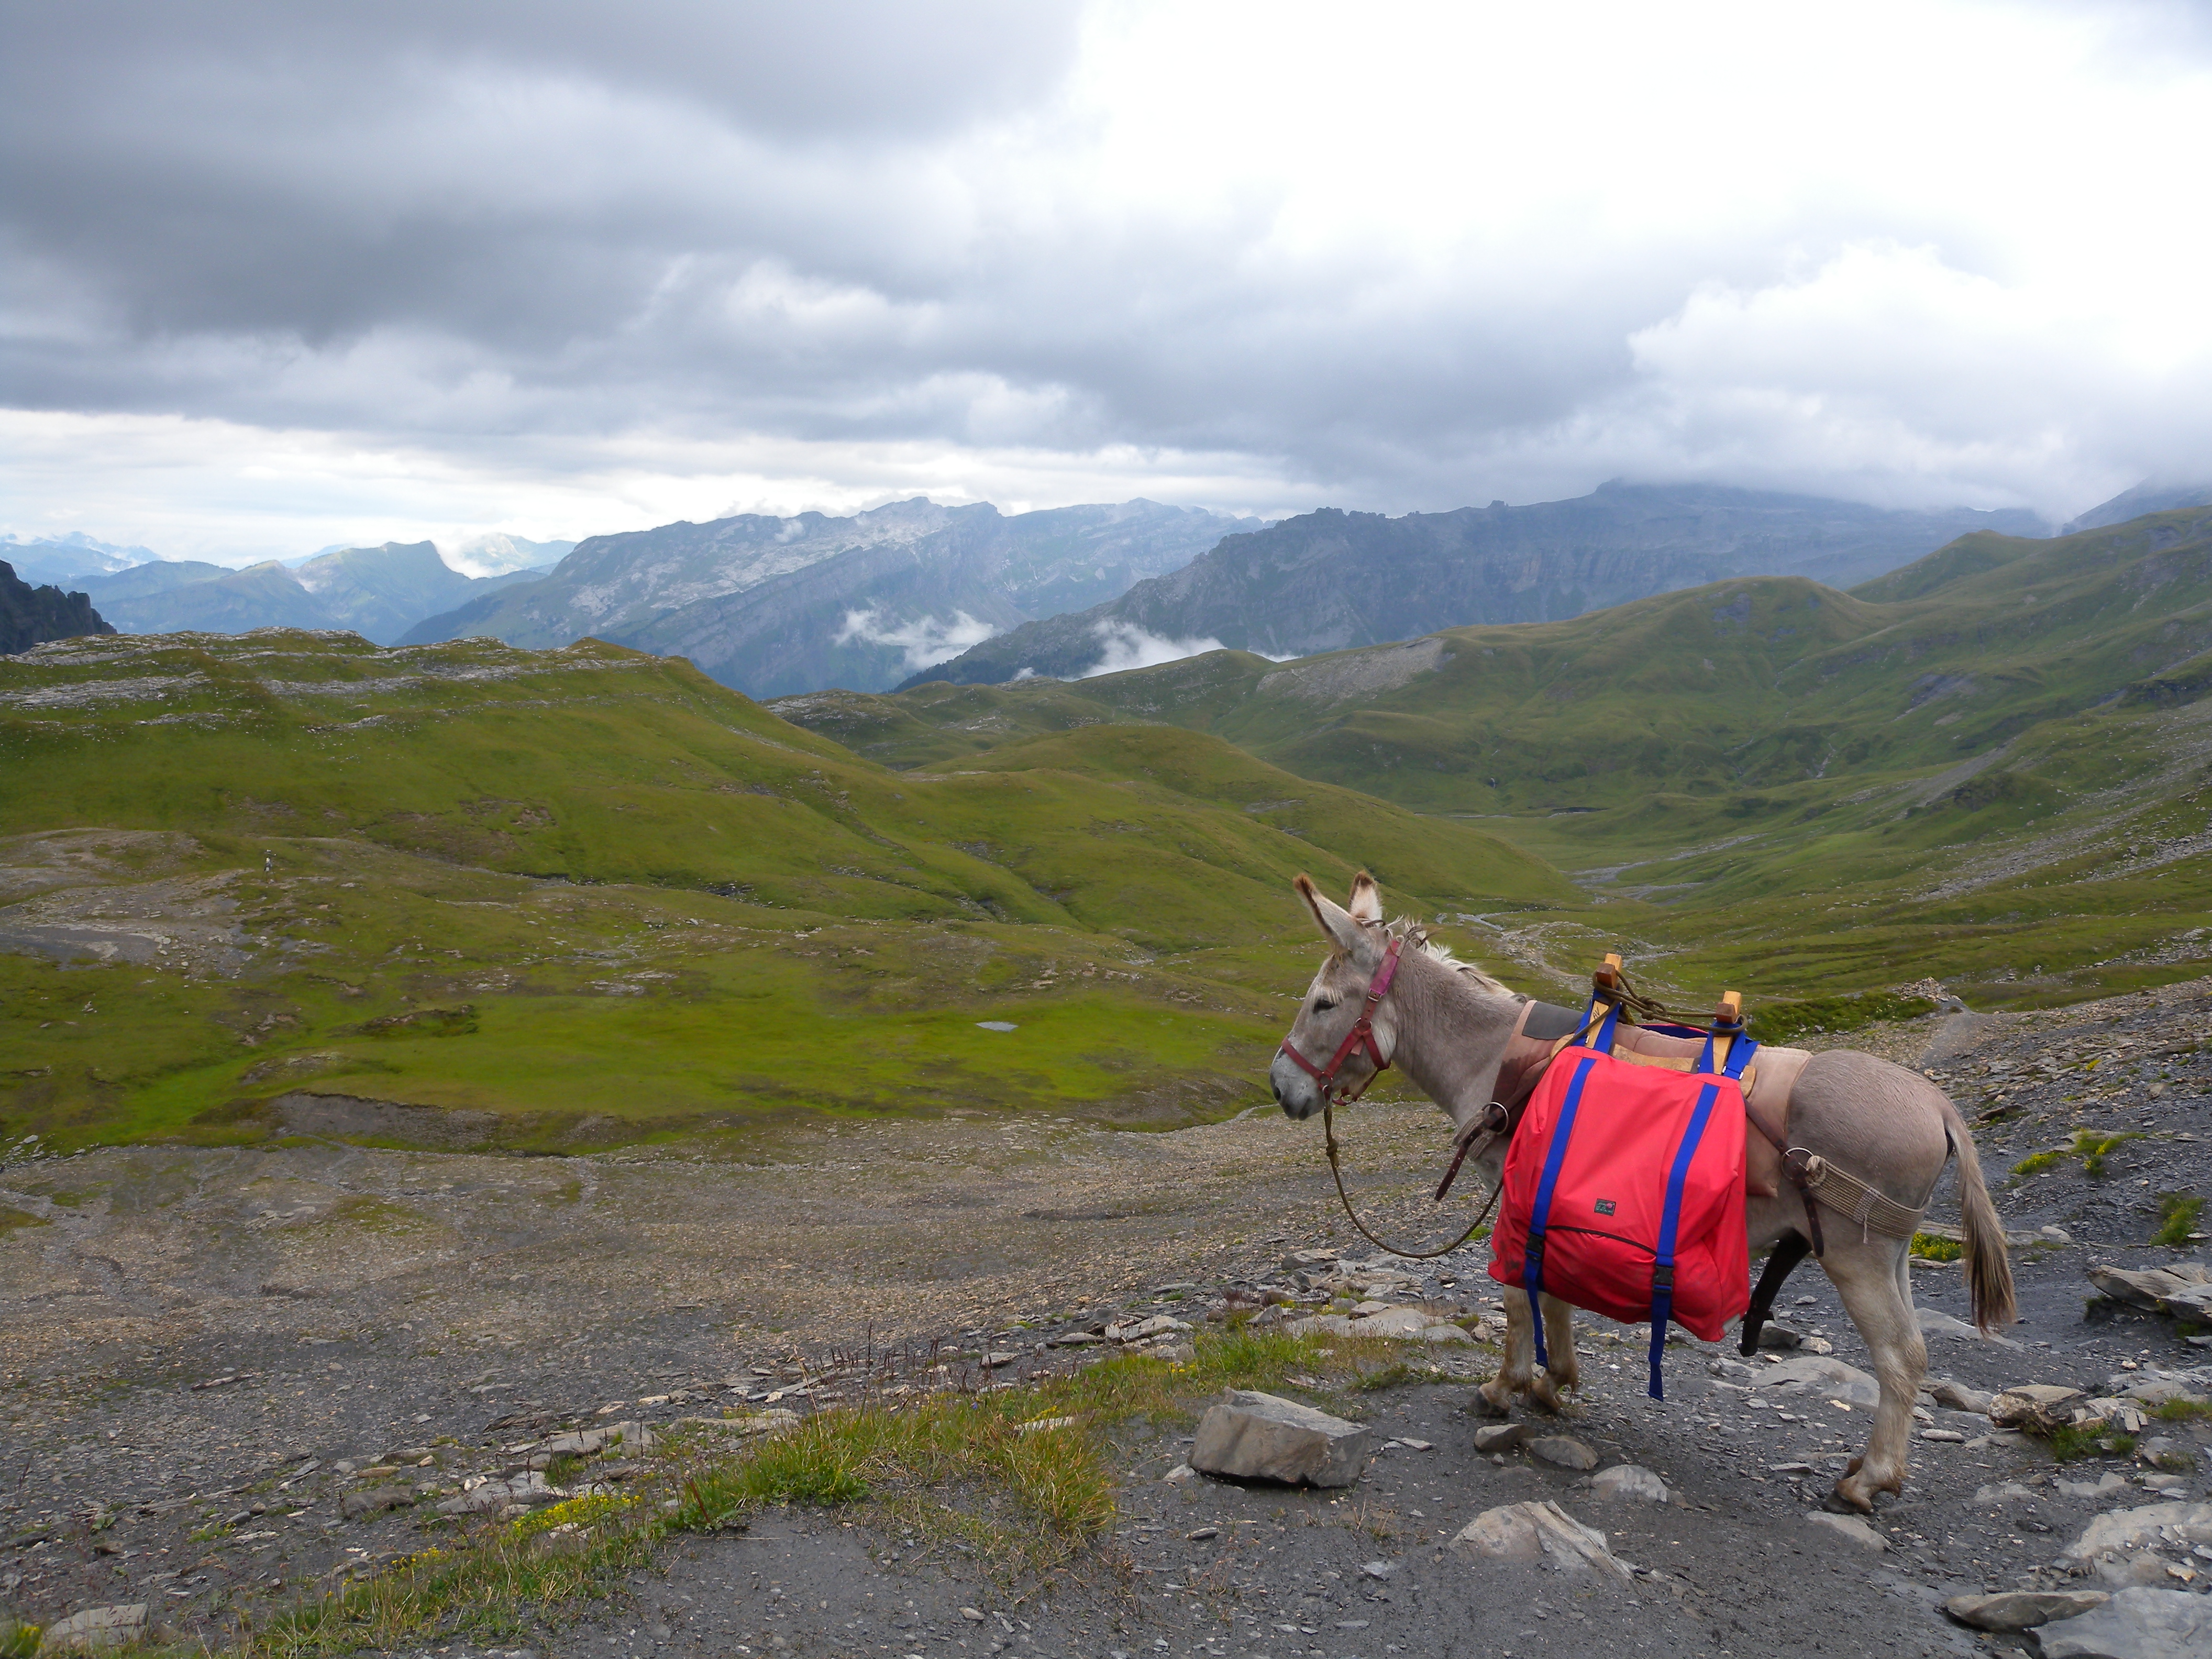 File:Mountain hiking with a donkey1.jpg - Wikimedia Commons